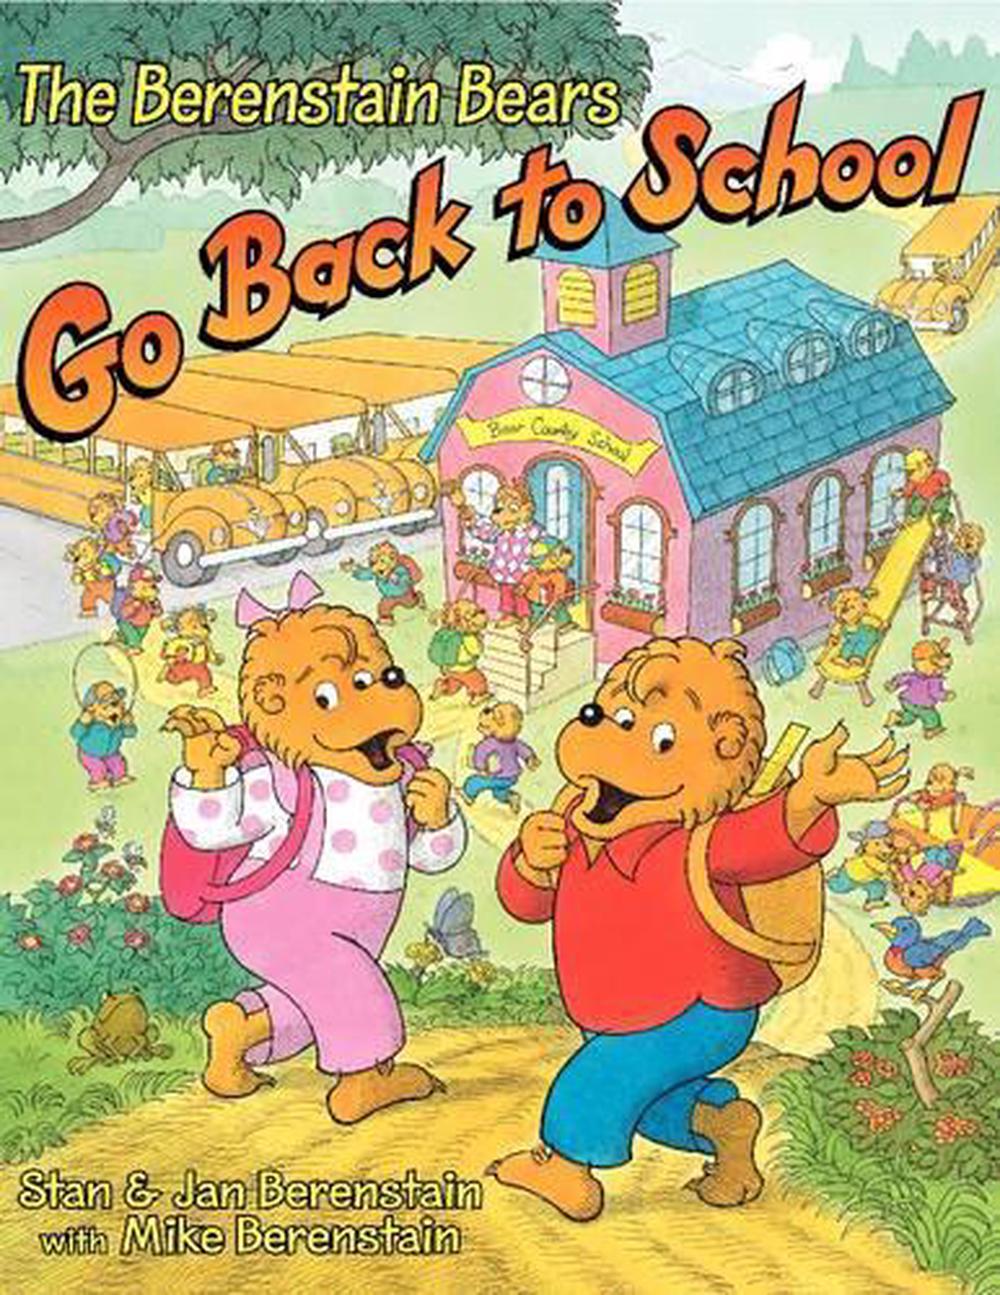 The Berenstain Bears Go to Camp by Stan Berenstain